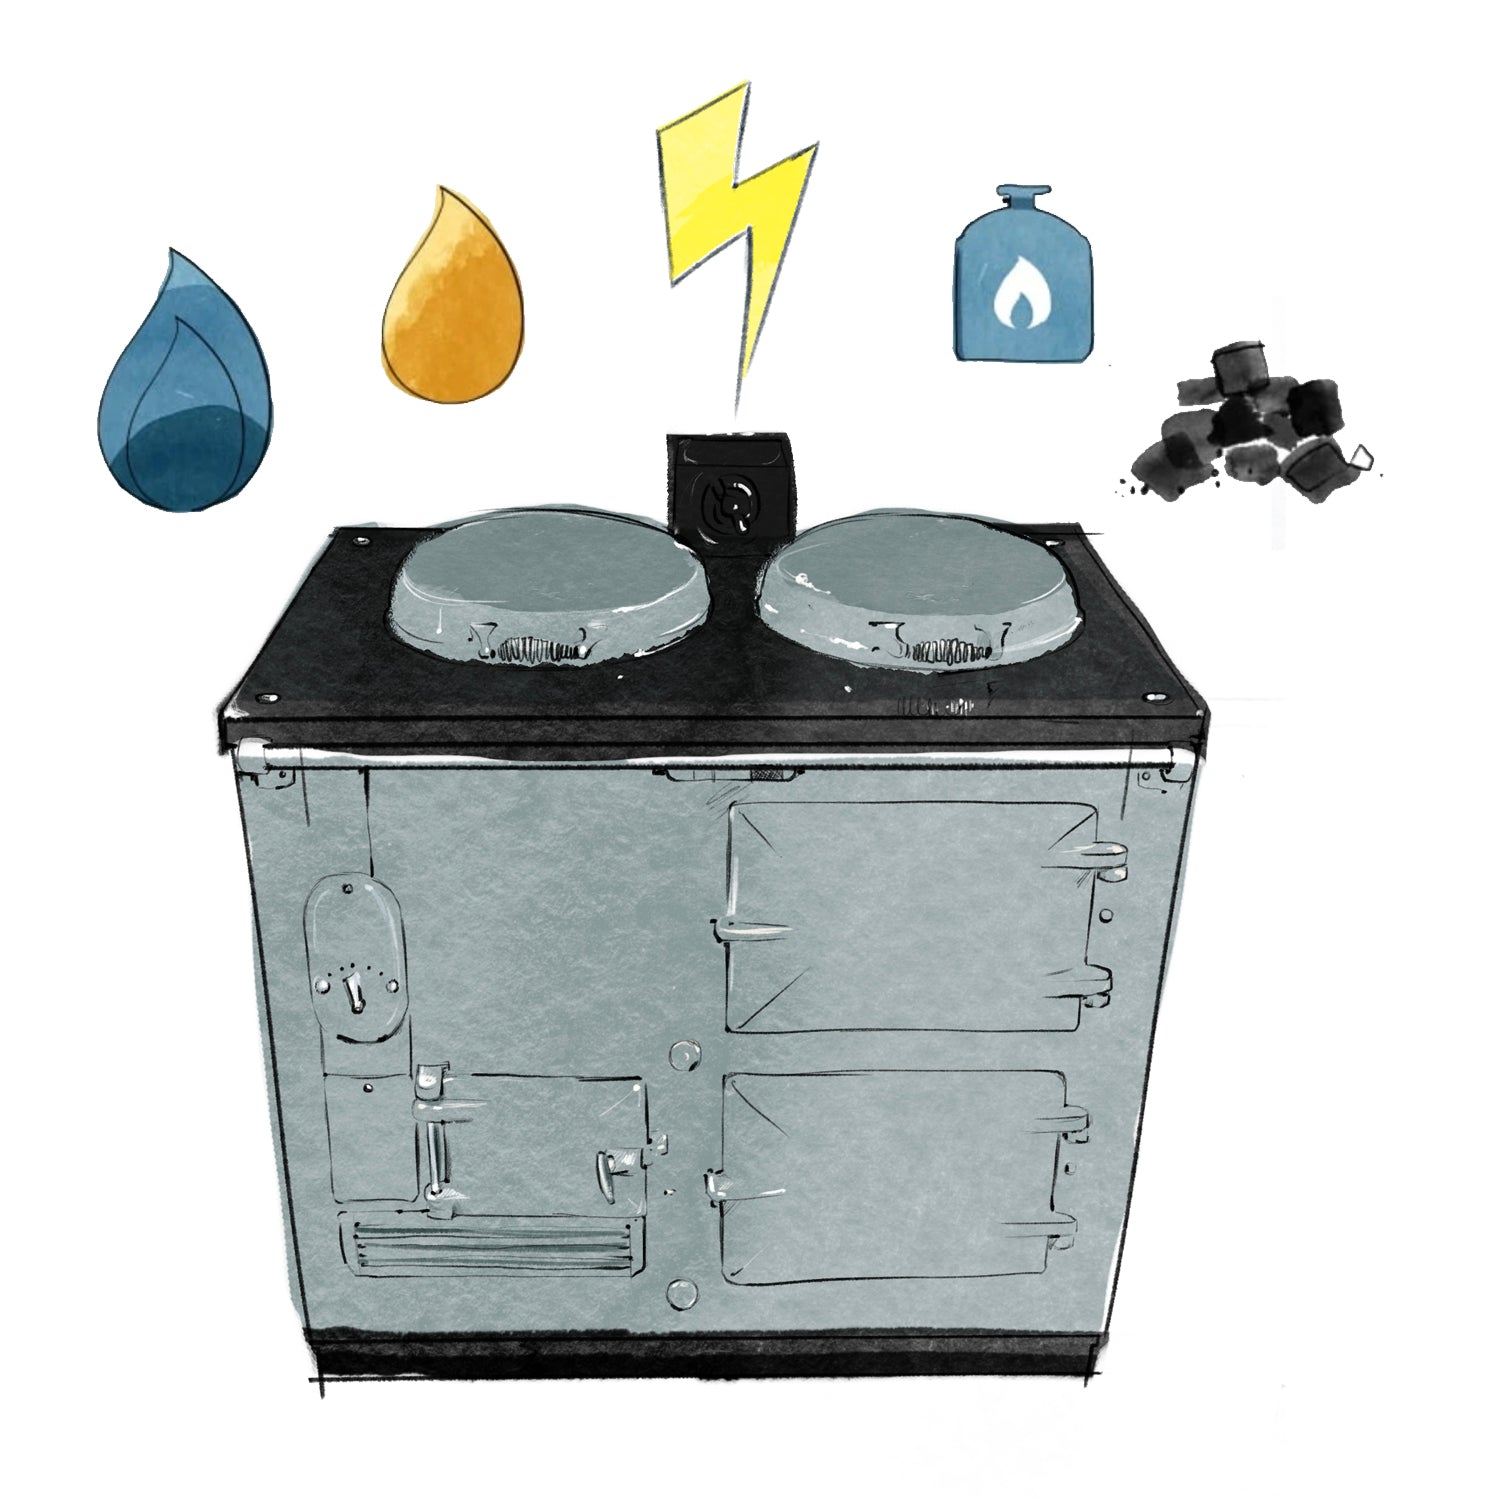 How to save money running your Aga range cooker high gas prices and running an Aga range cooker